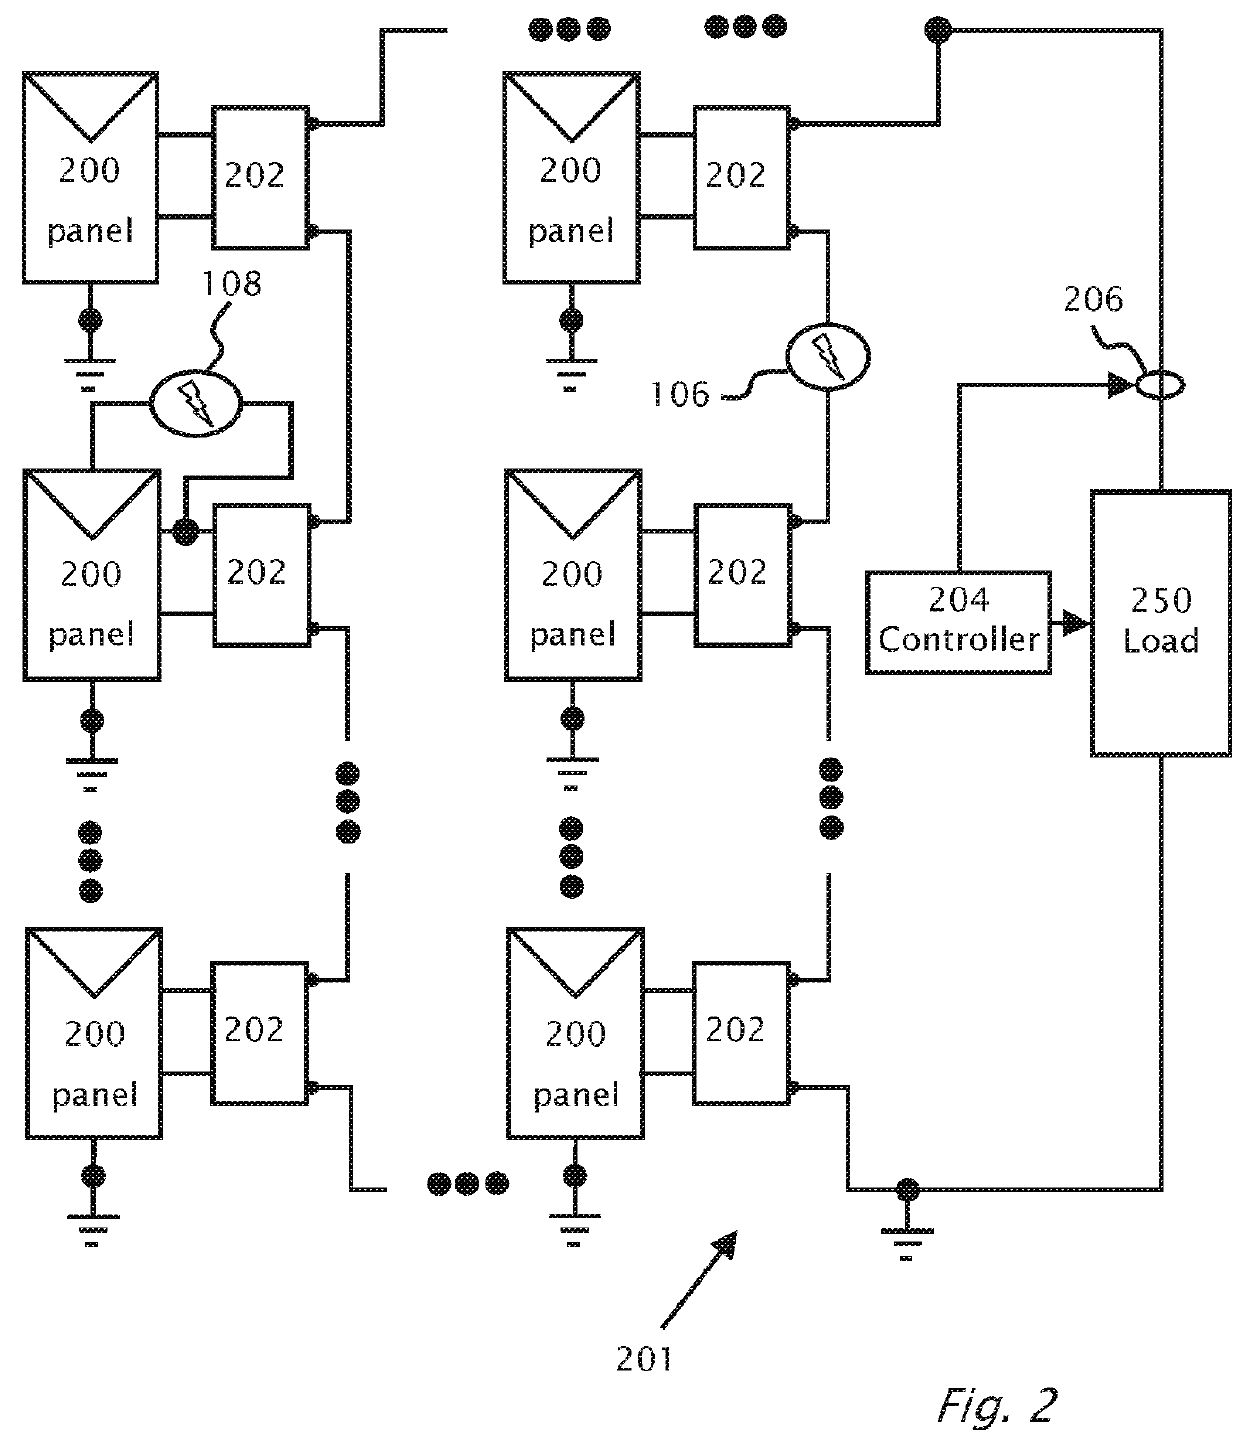 Arc Detection and Prevention in a Power Generation System